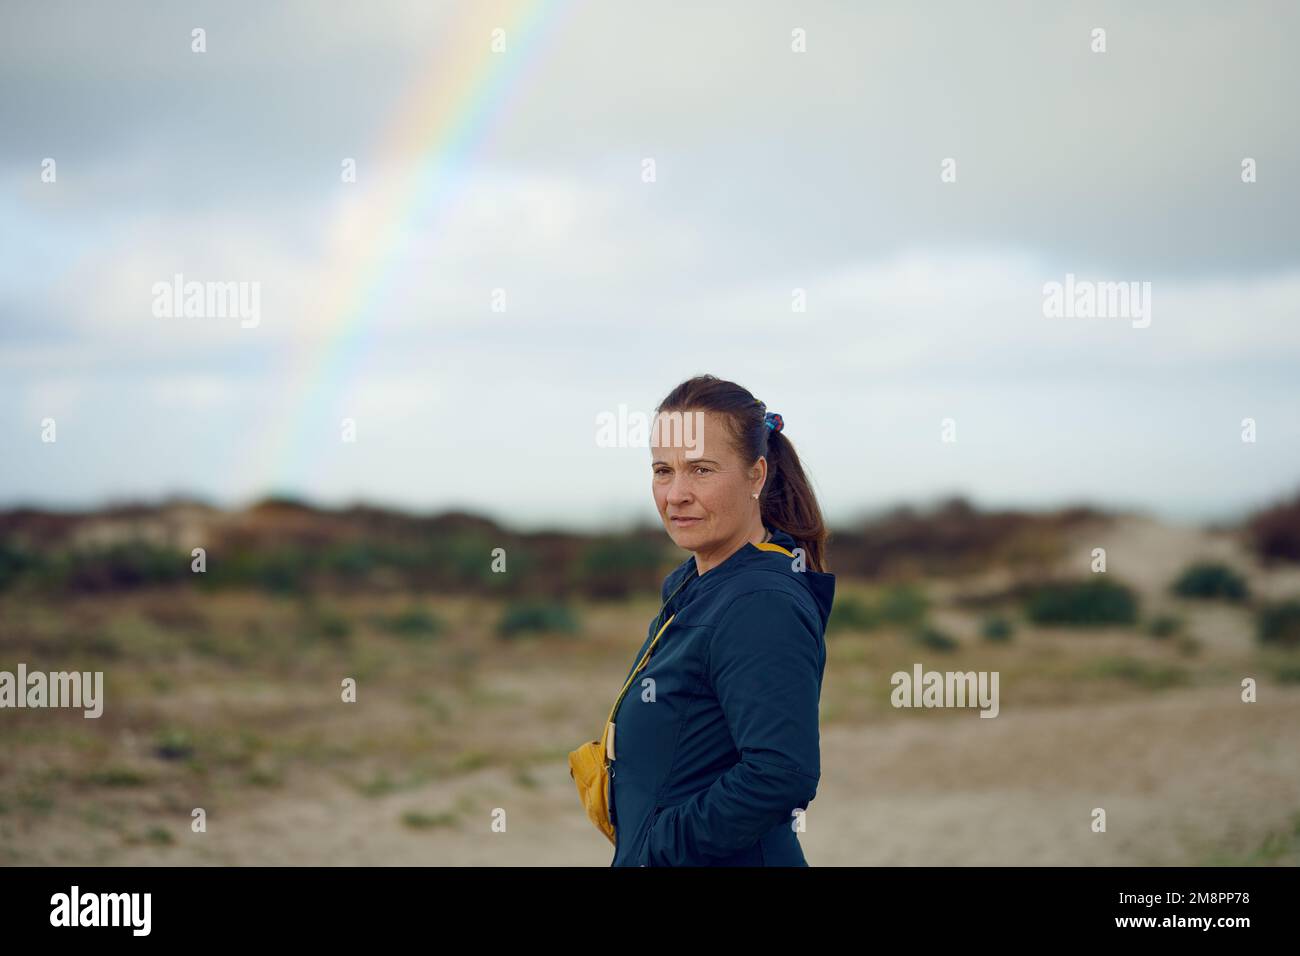 Middle-aged woman looking thoughtful at the camera with a rainbow in the background, concept for future outlook Stock Photo